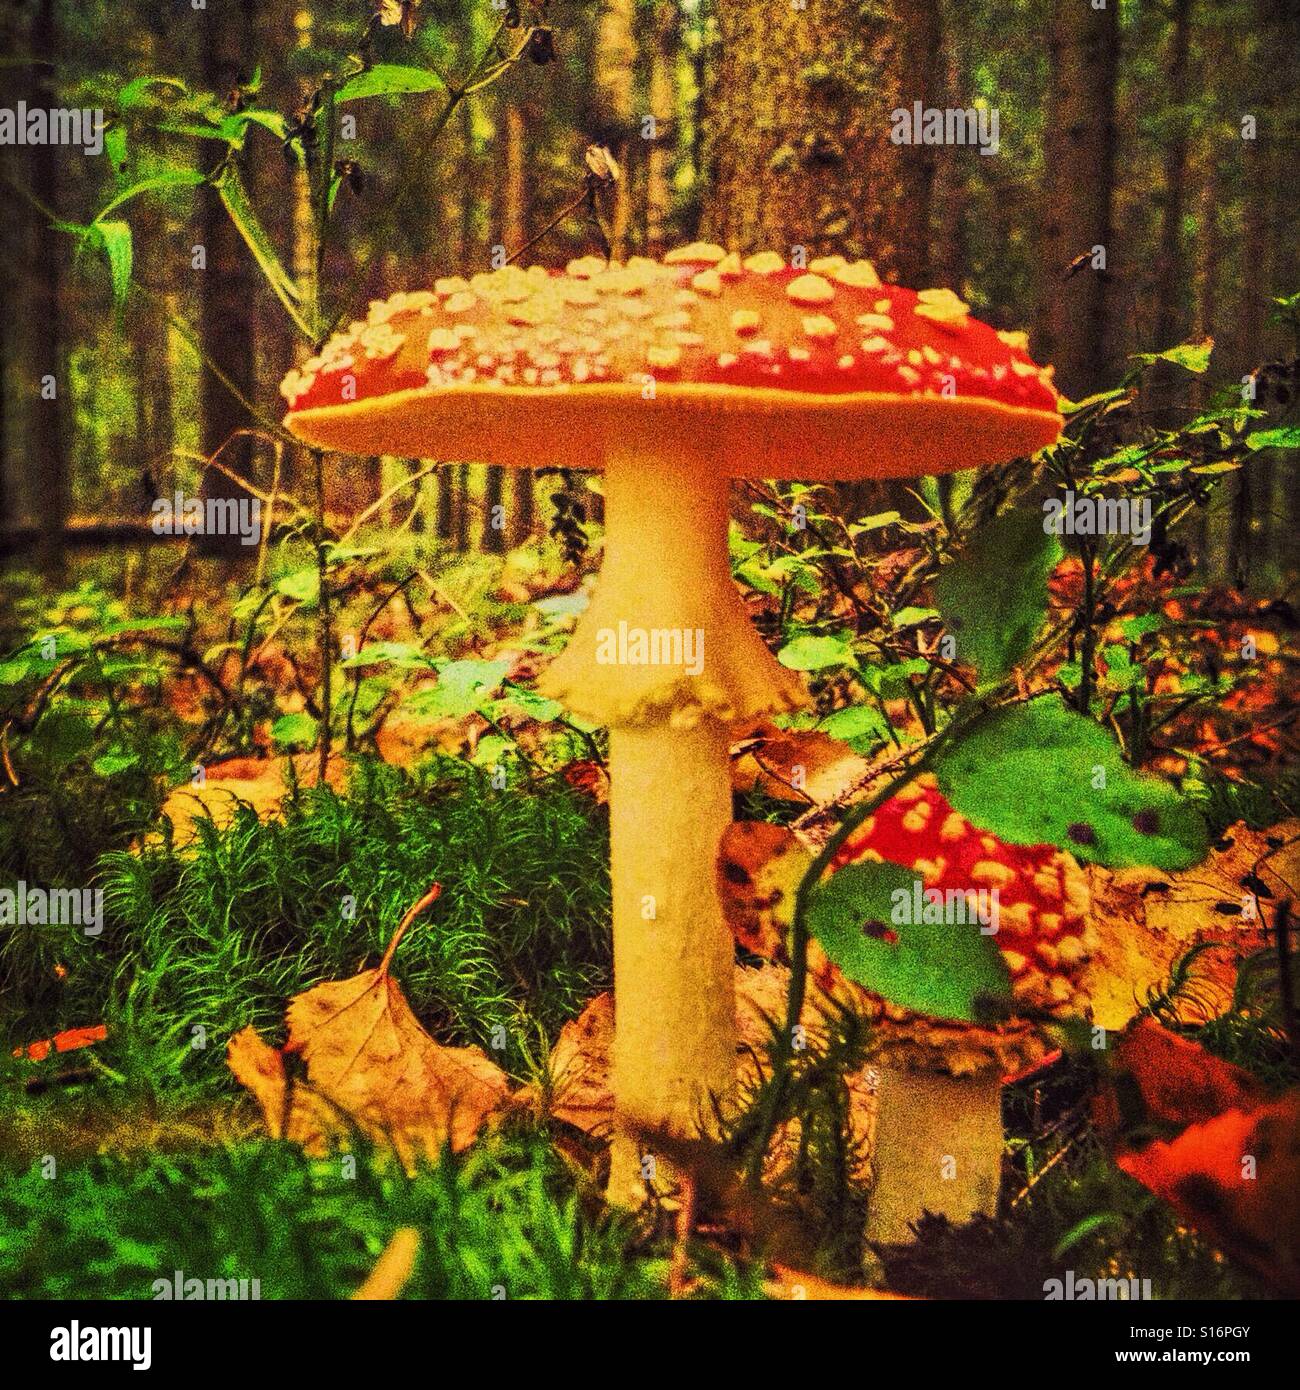 Beautiful mushroom in the forest Stock Photo